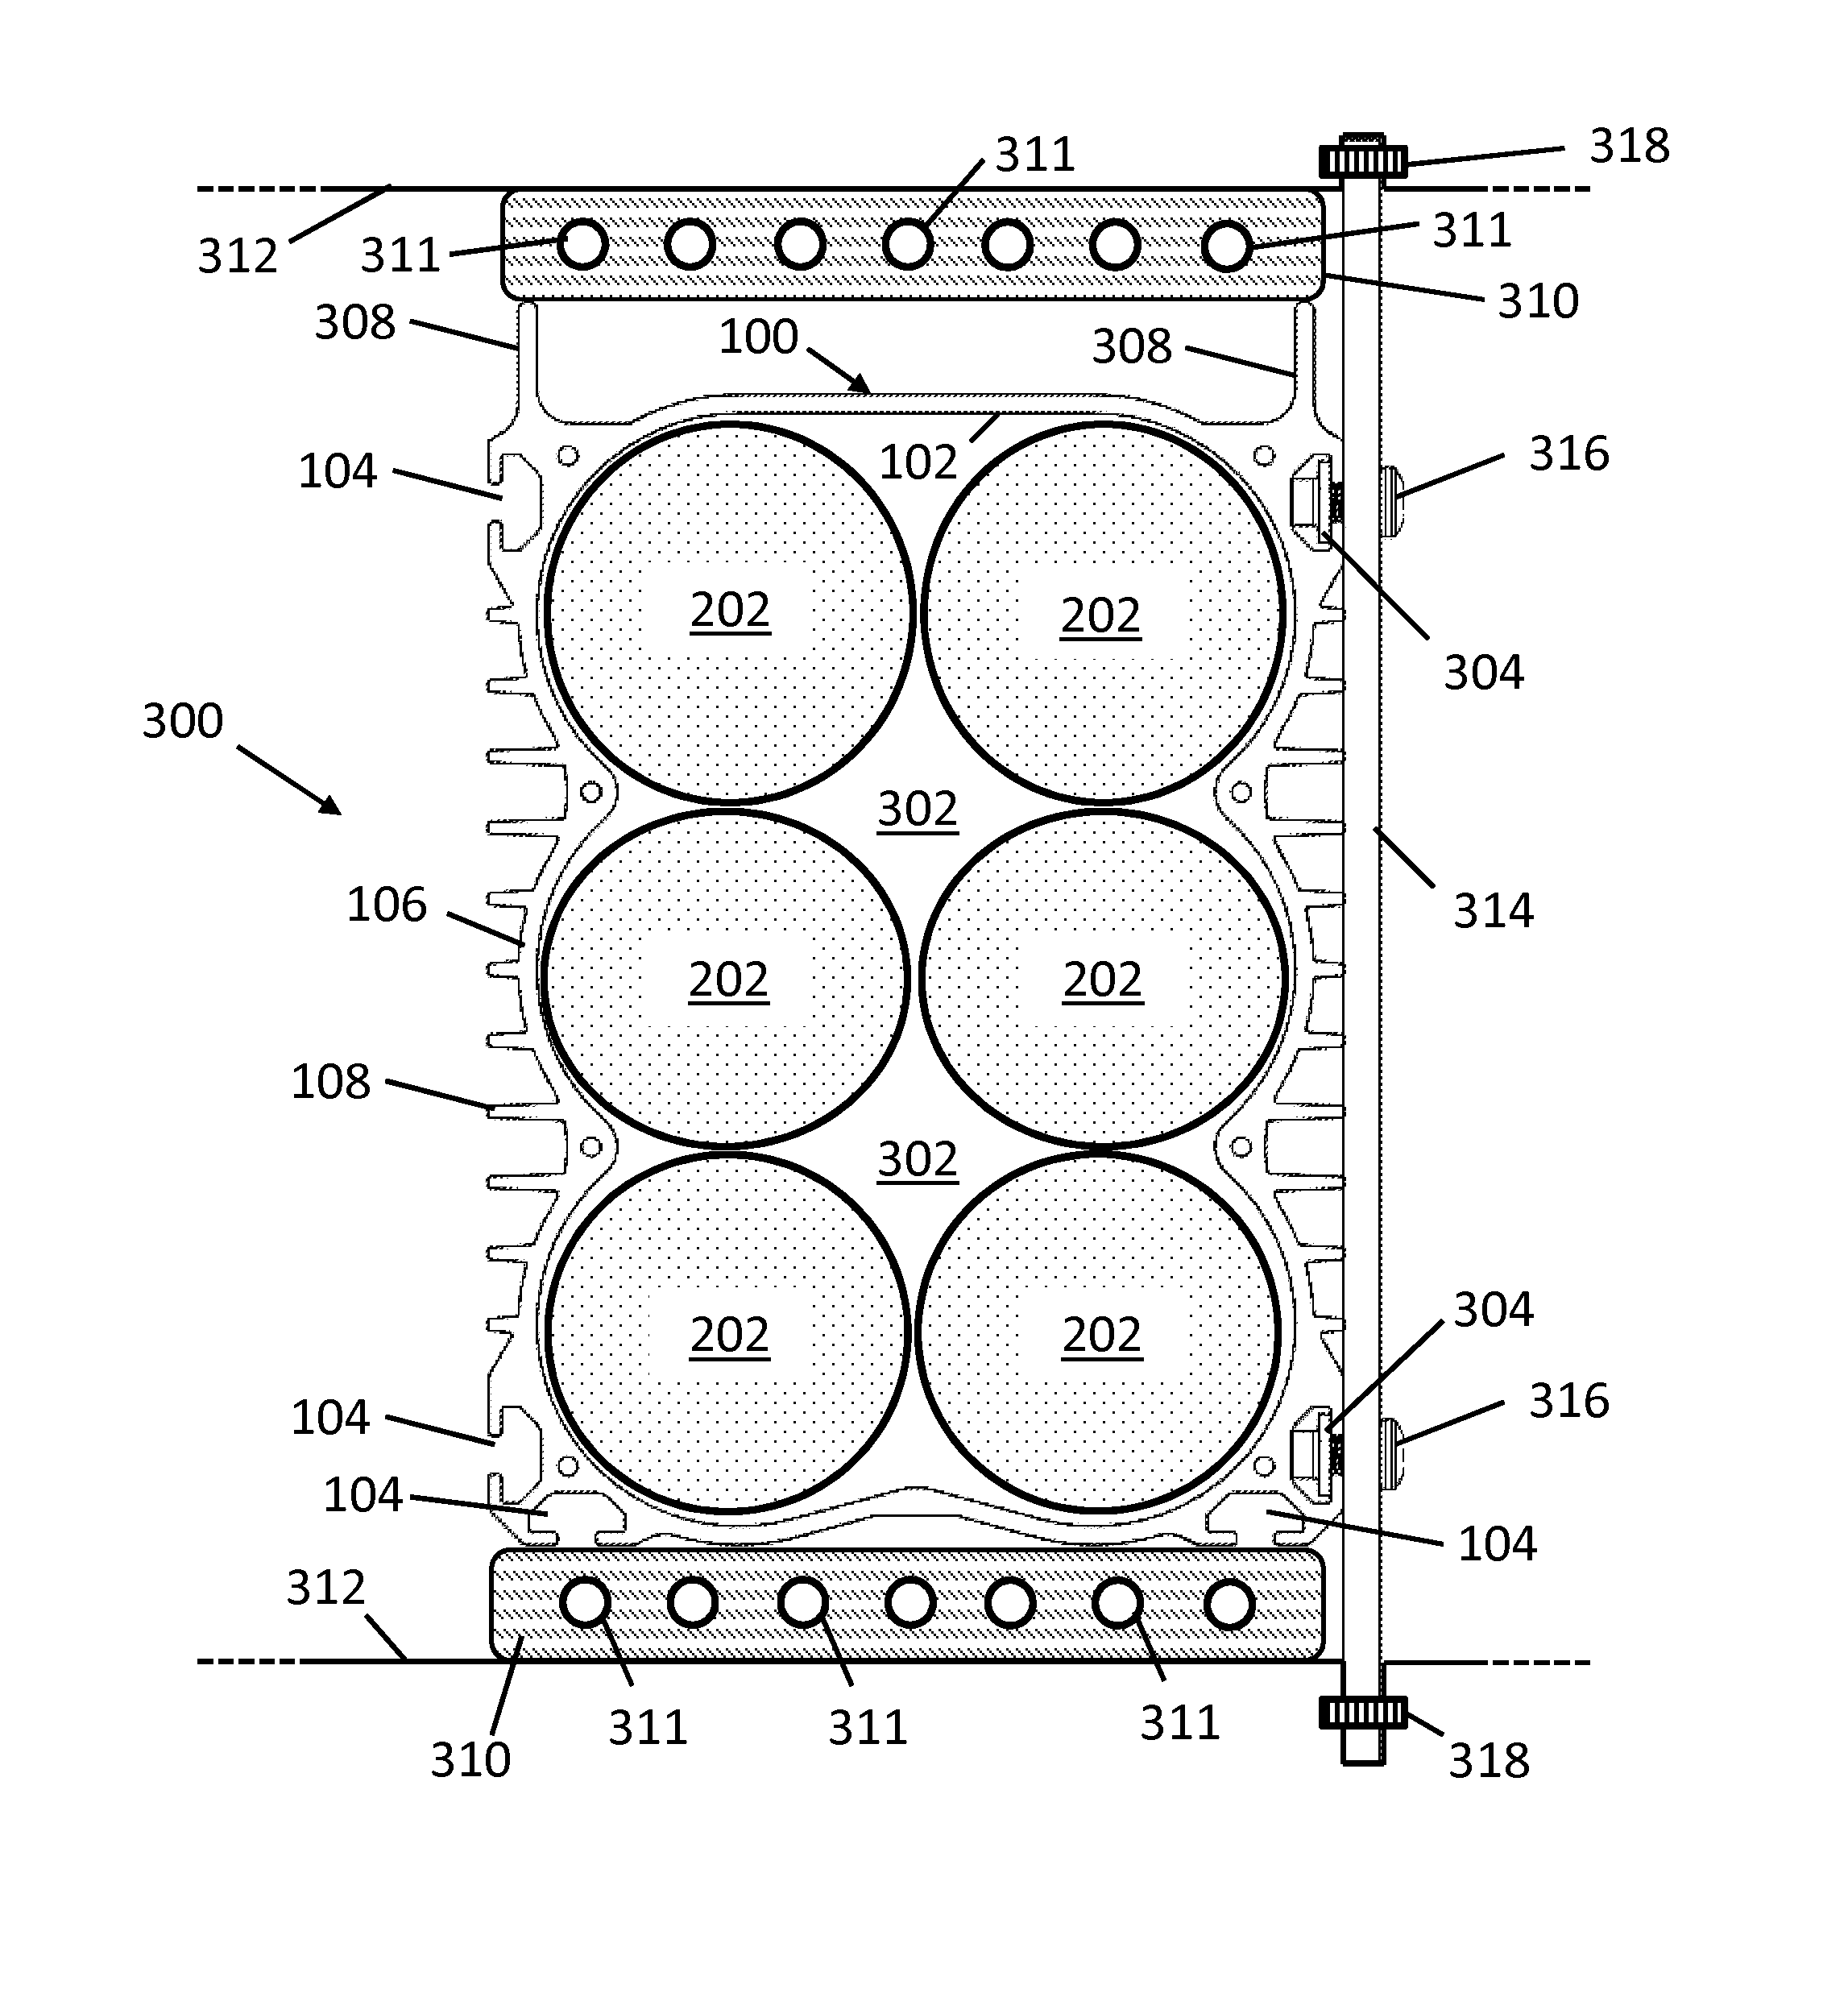 Apparatus for enclosing energy storage devices